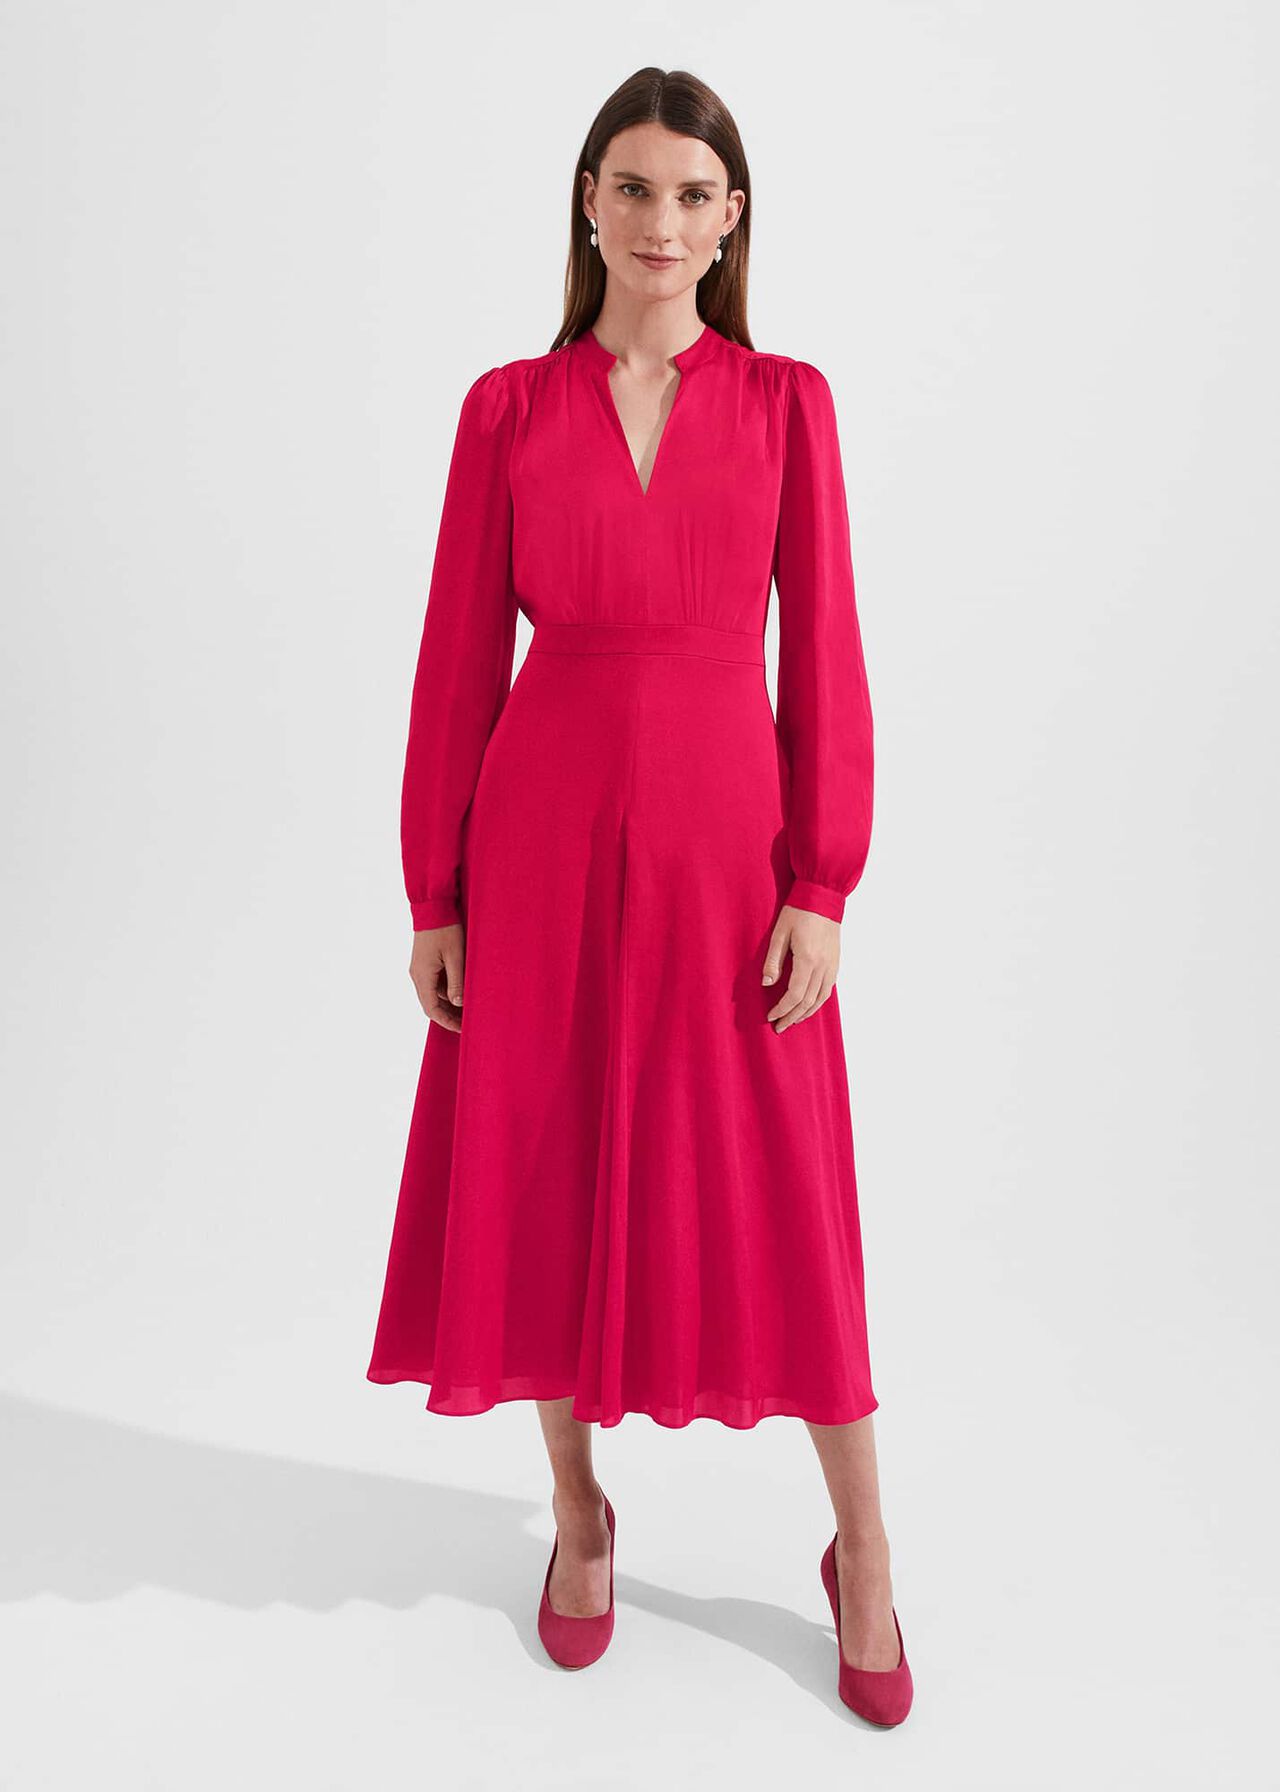 Ivanna Fit And Flare Dress, Jam Pink, hi-res